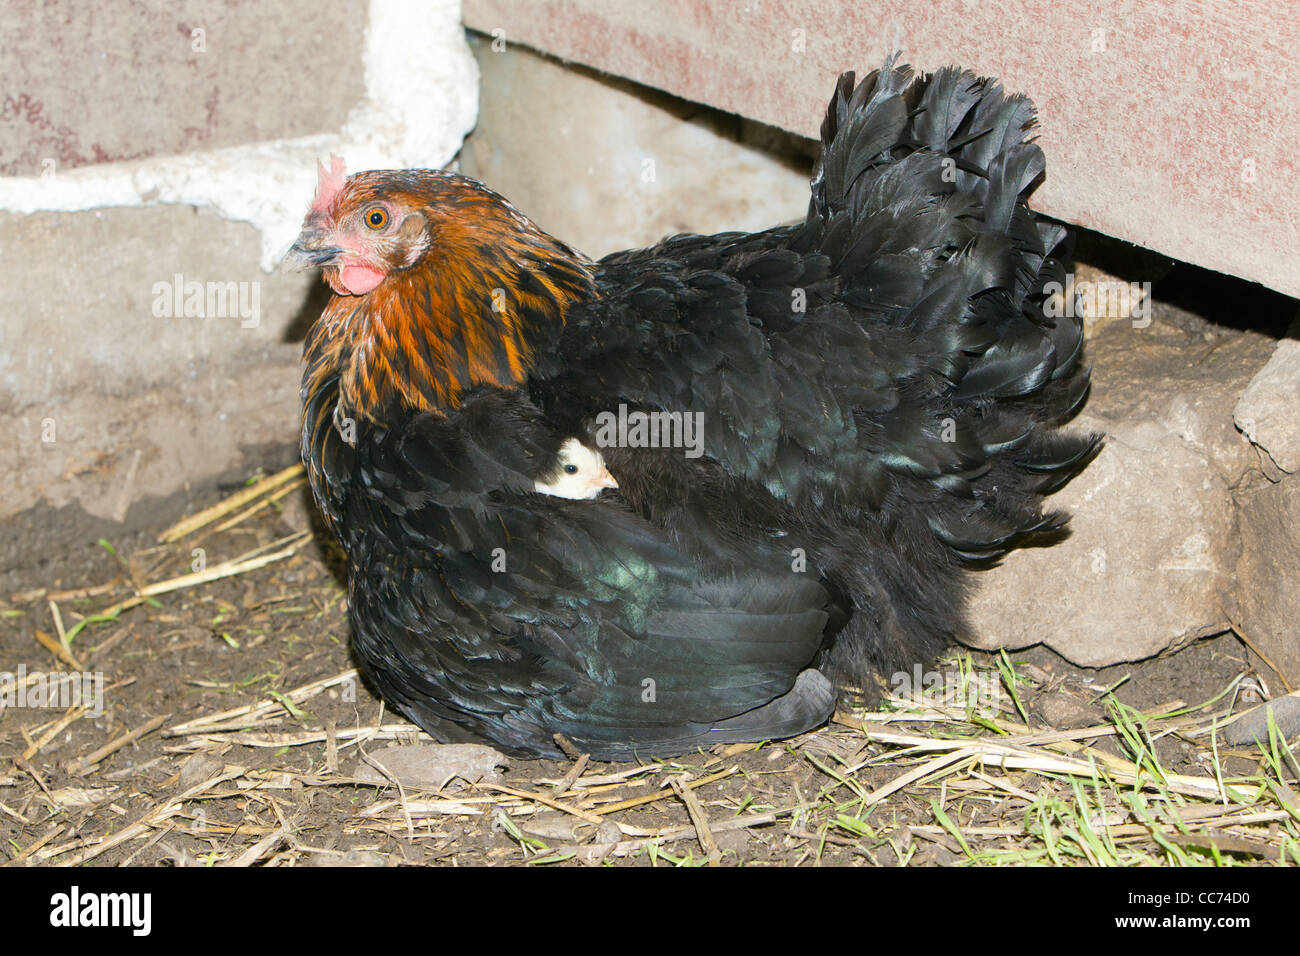 Hen Brooding Chicks in Chicken Shed, Lower Saxony, Germany Stock Photo